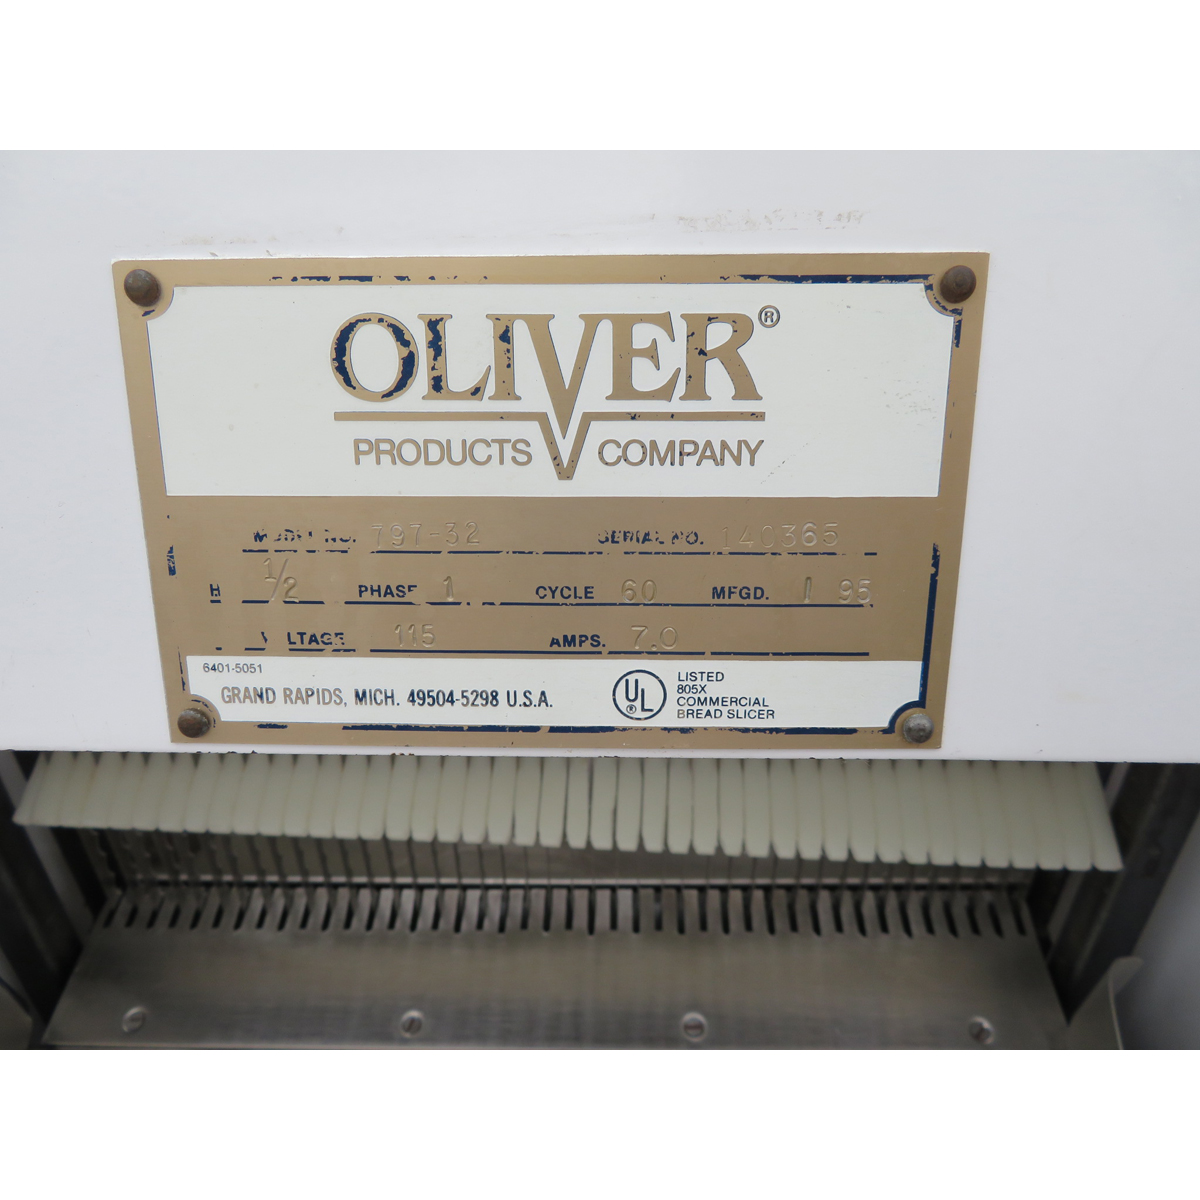 Oliver 797-32 Gravity Feed Bread Slicer 3/8" Cut w/Swing-Away Bagger 1197, Used Excellent Condition image 6